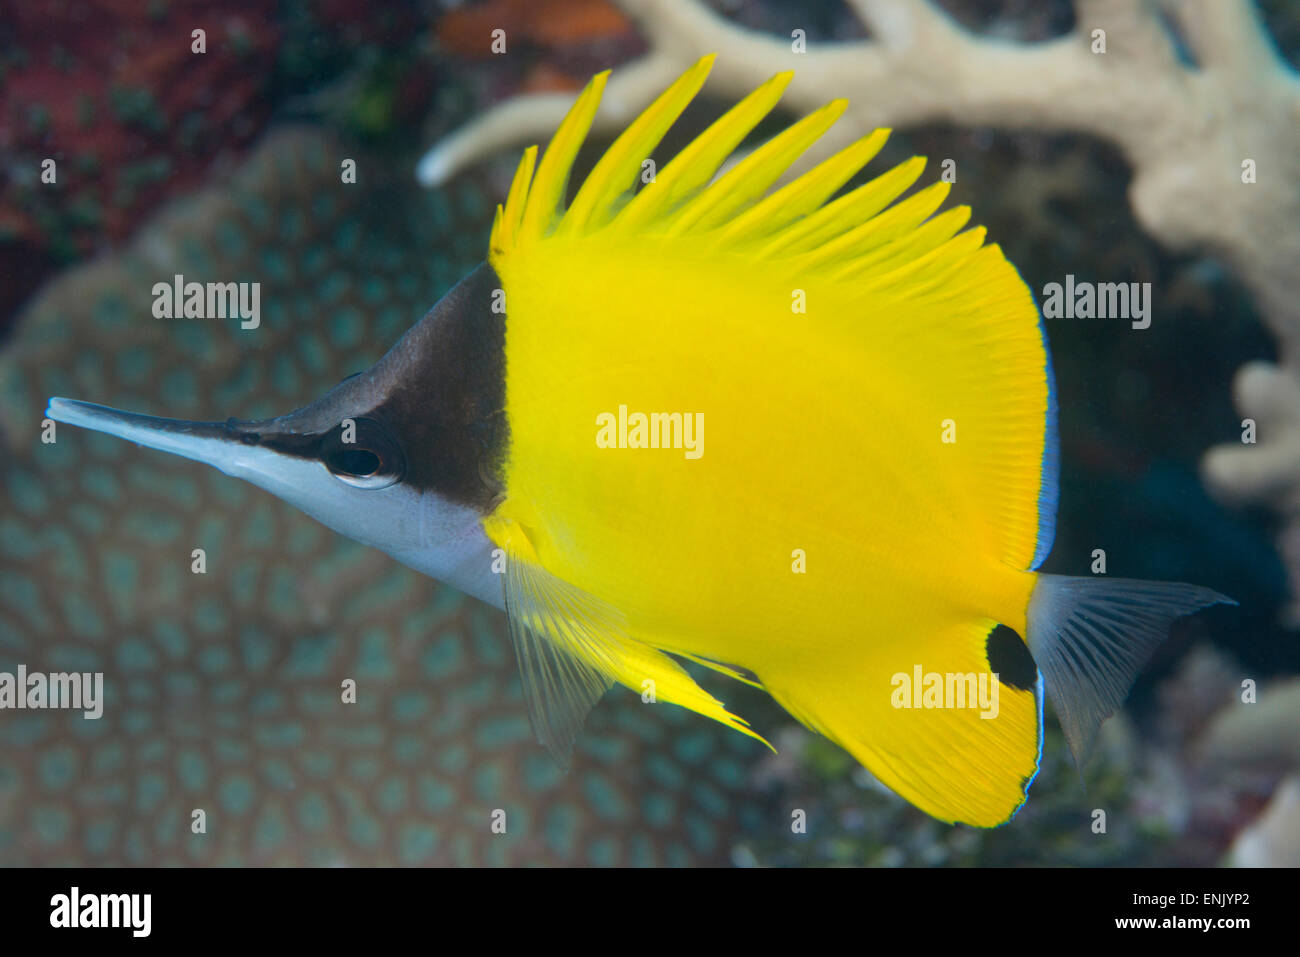 Longnose butterflyfish, adapted to feed in crevices in the reef and snips off soft pieces of corals, Queensland, Australia Stock Photo